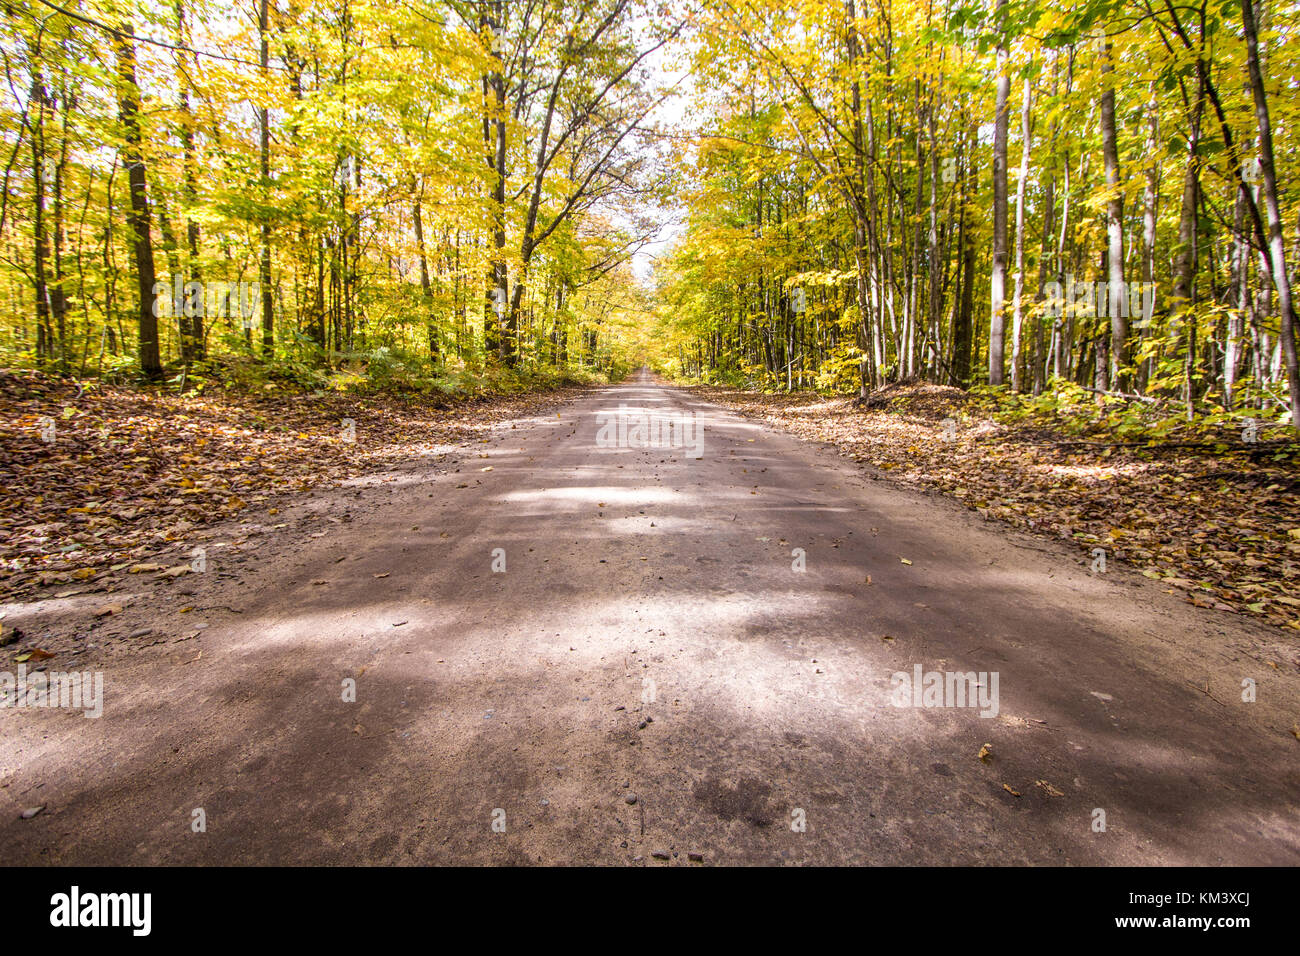 Down The Dirt Road. Autumn forest with dirt road diminishing through the beautiful forest to the distant horizon. Hiawatha National Forest in Michigan Stock Photo